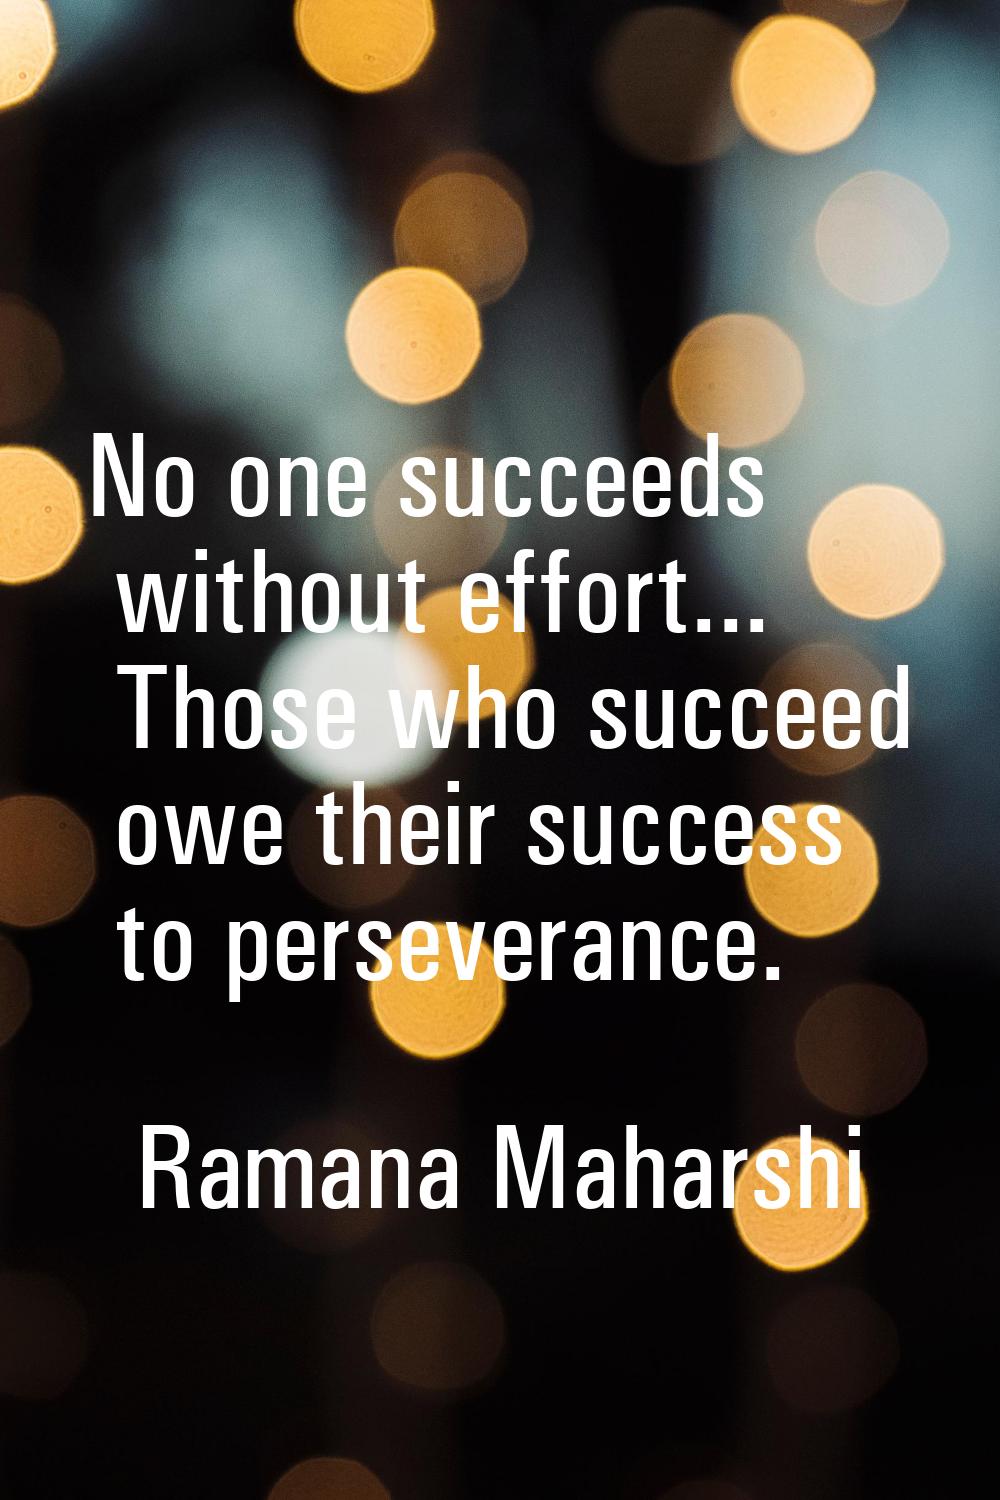 No one succeeds without effort... Those who succeed owe their success to perseverance.